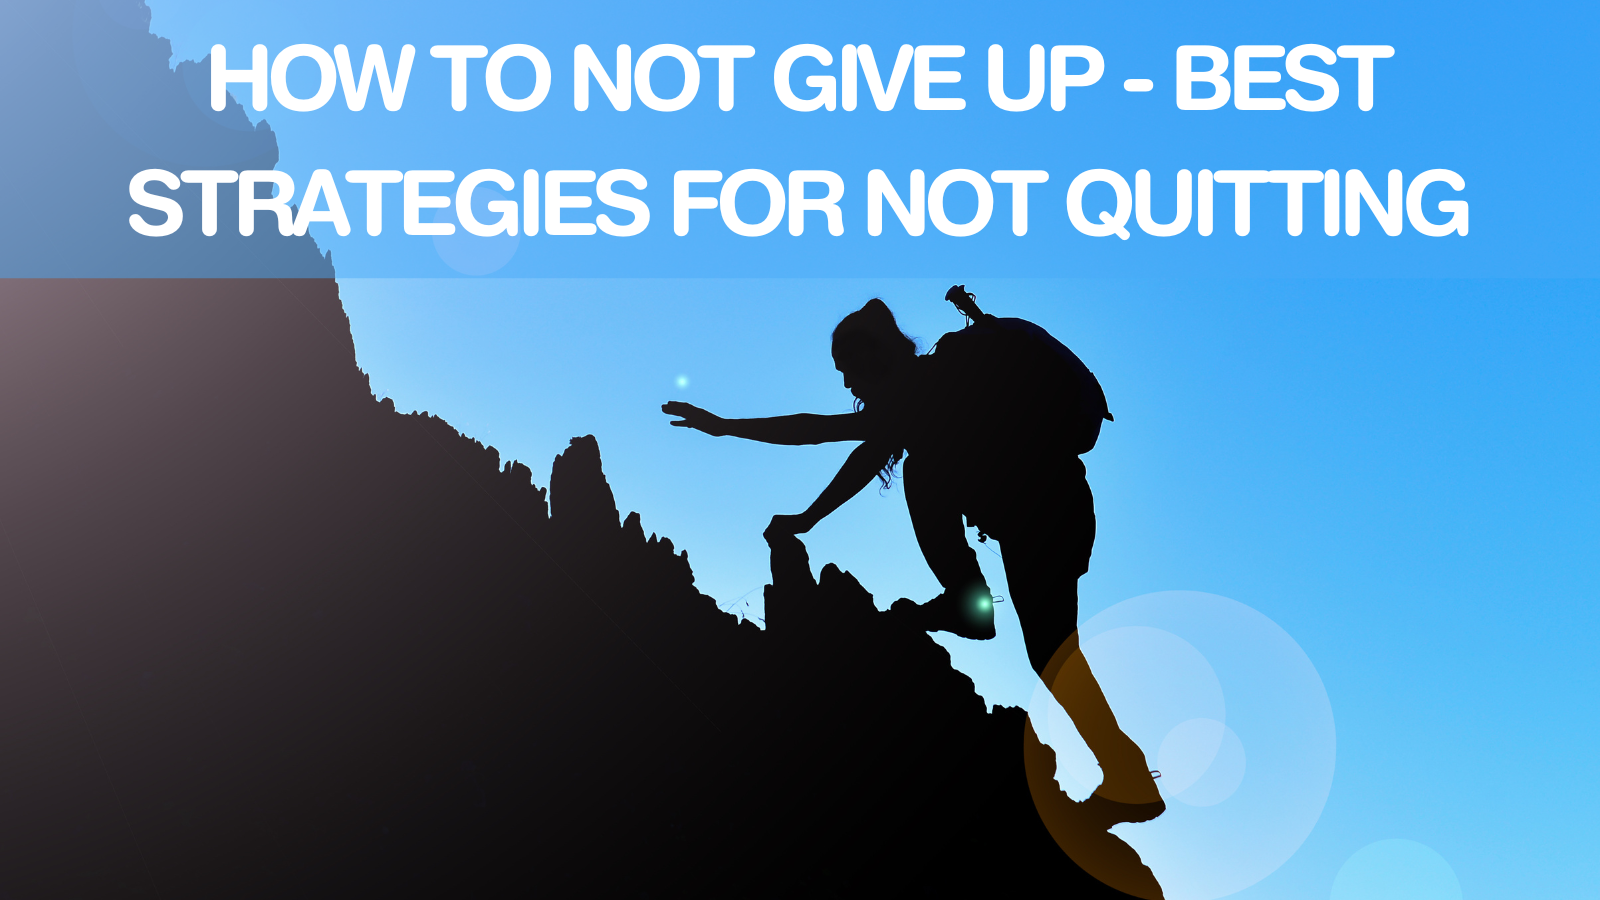 How To Not Give Up - Best Strategies For Not Quitting